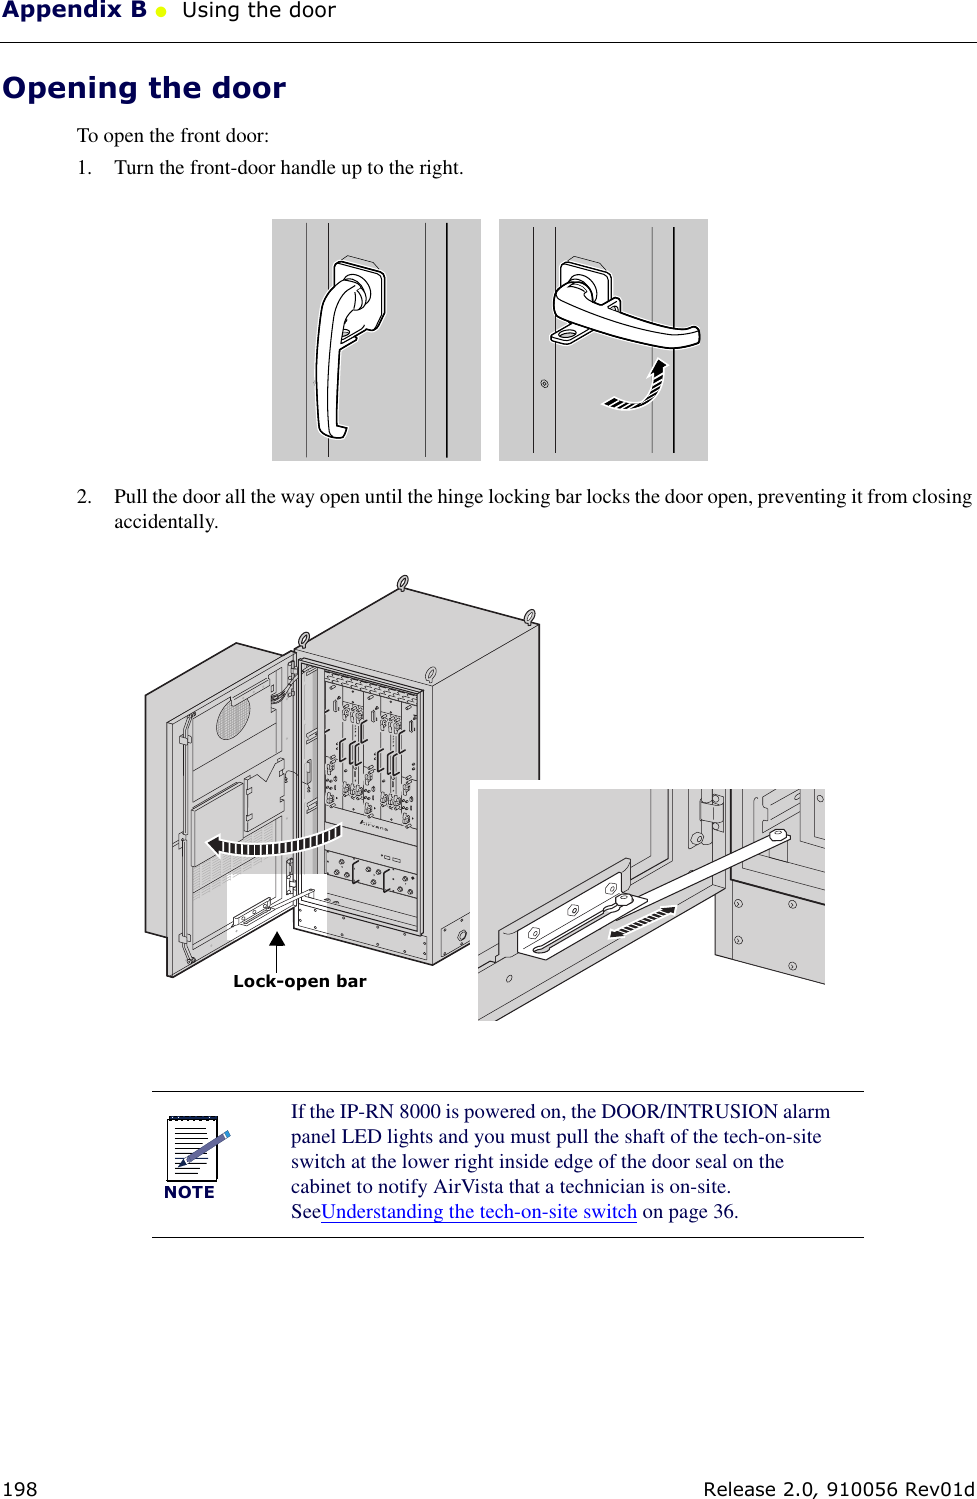 Appendix B ●  Using the door198 Release 2.0, 910056 Rev01dOpening the doorTo open the front door:1. Turn the front-door handle up to the right.2. Pull the door all the way open until the hinge locking bar locks the door open, preventing it from closing accidentally.NOTEIf the IP-RN 8000 is powered on, the DOOR/INTRUSION alarm panel LED lights and you must pull the shaft of the tech-on-site switch at the lower right inside edge of the door seal on the cabinet to notify AirVista that a technician is on-site. SeeUnderstanding the tech-on-site switch on page 36.Lock-open bar